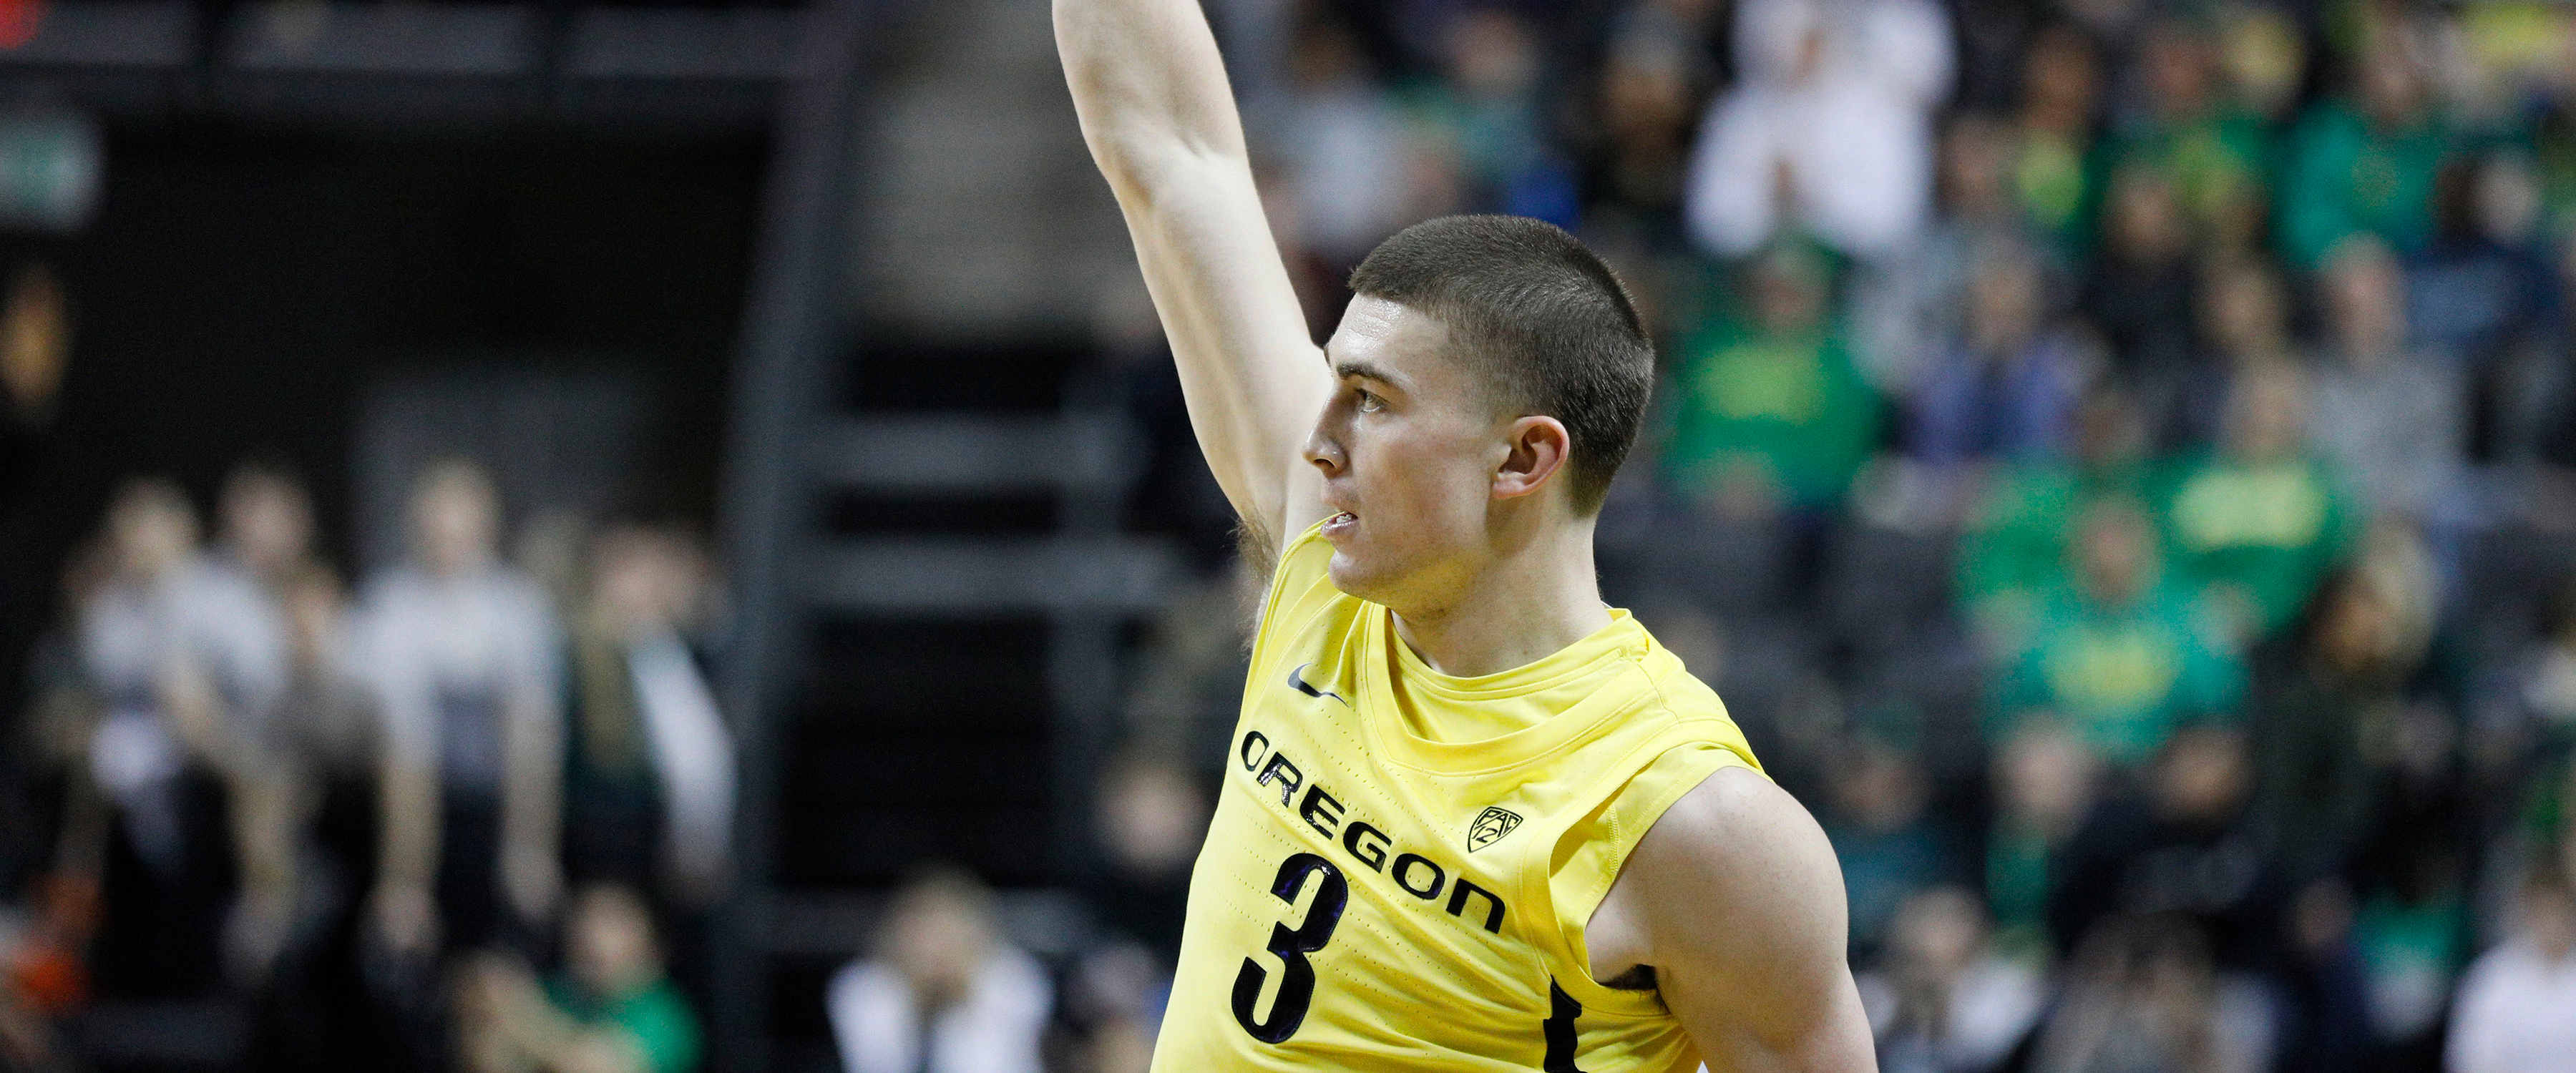 Payton Pritchard Could Be More than He Appears